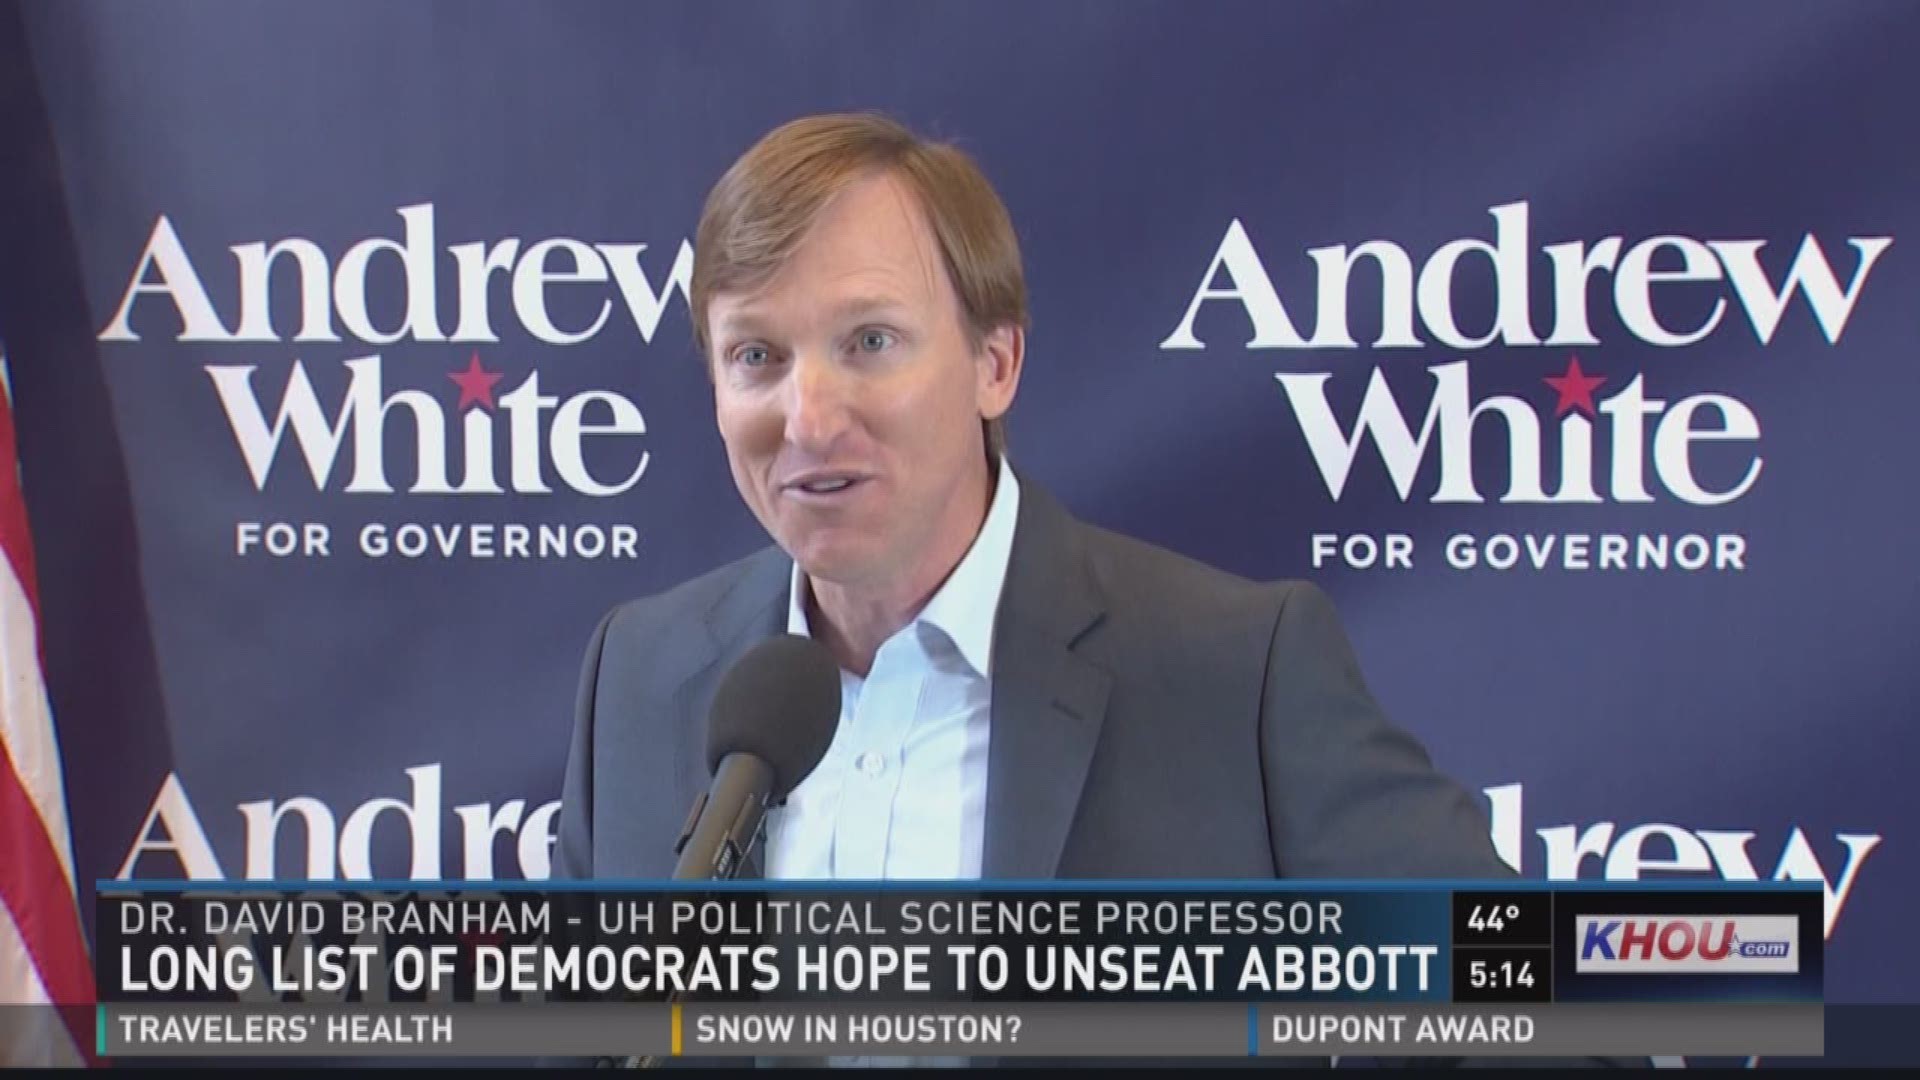 The son of late former Texas Governor Mark White, Andrew White, has officially thrown his hat into the ring for the 2018 gubernatorial race.